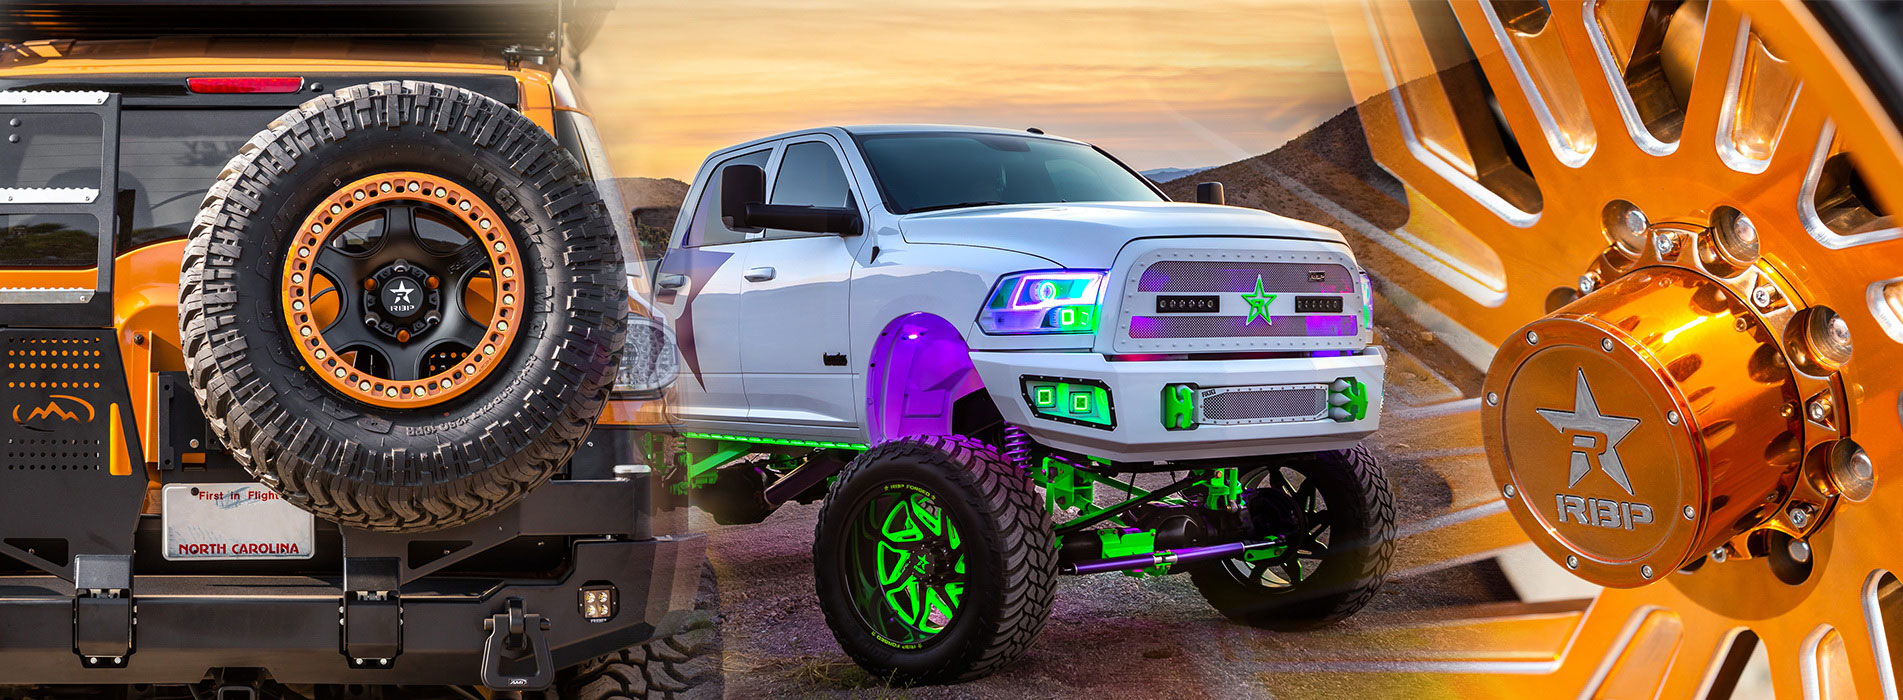 lifted power wheels truck